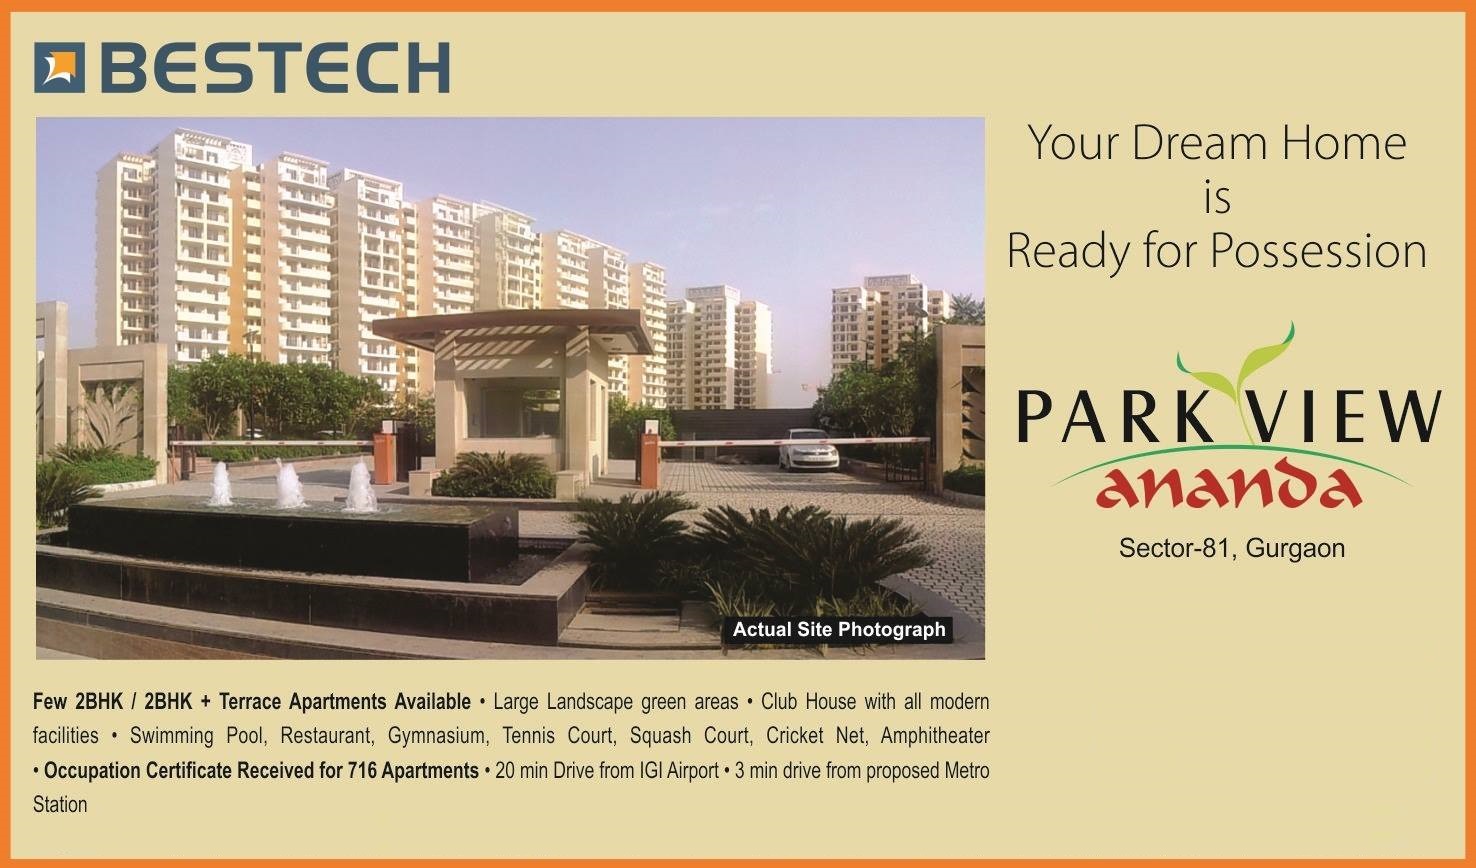 Bestech Park View Ananda is Now Ready to Move - Possession Commenced Update